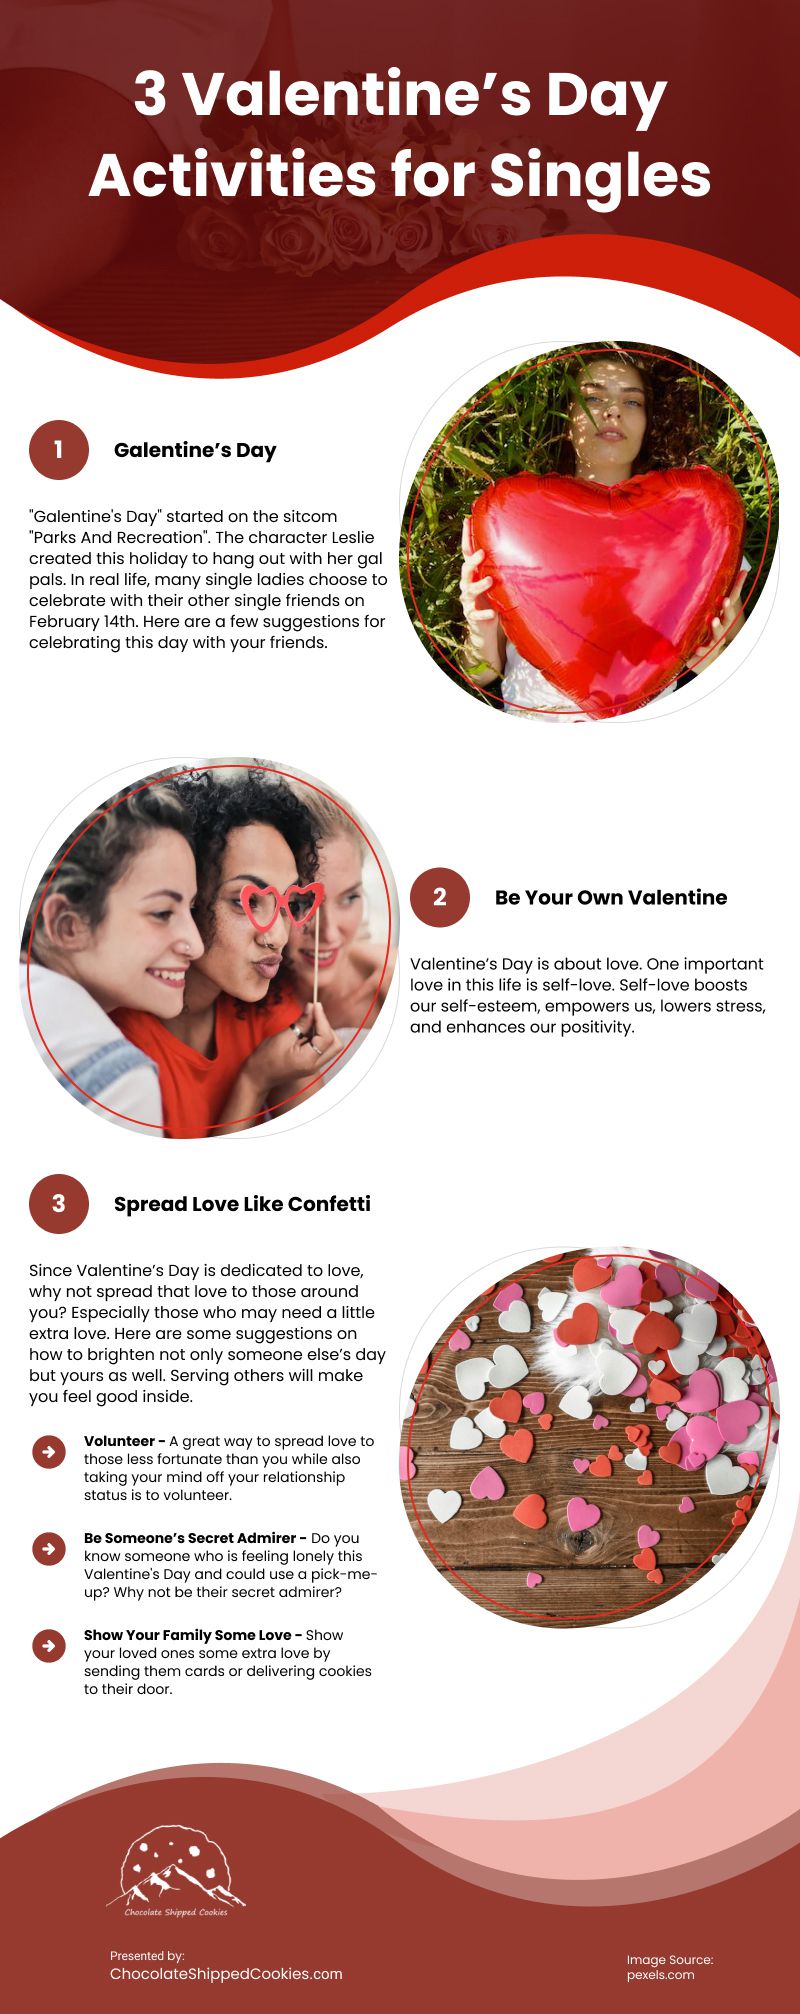 3 Valentine's Day Activities for Singles Infographic